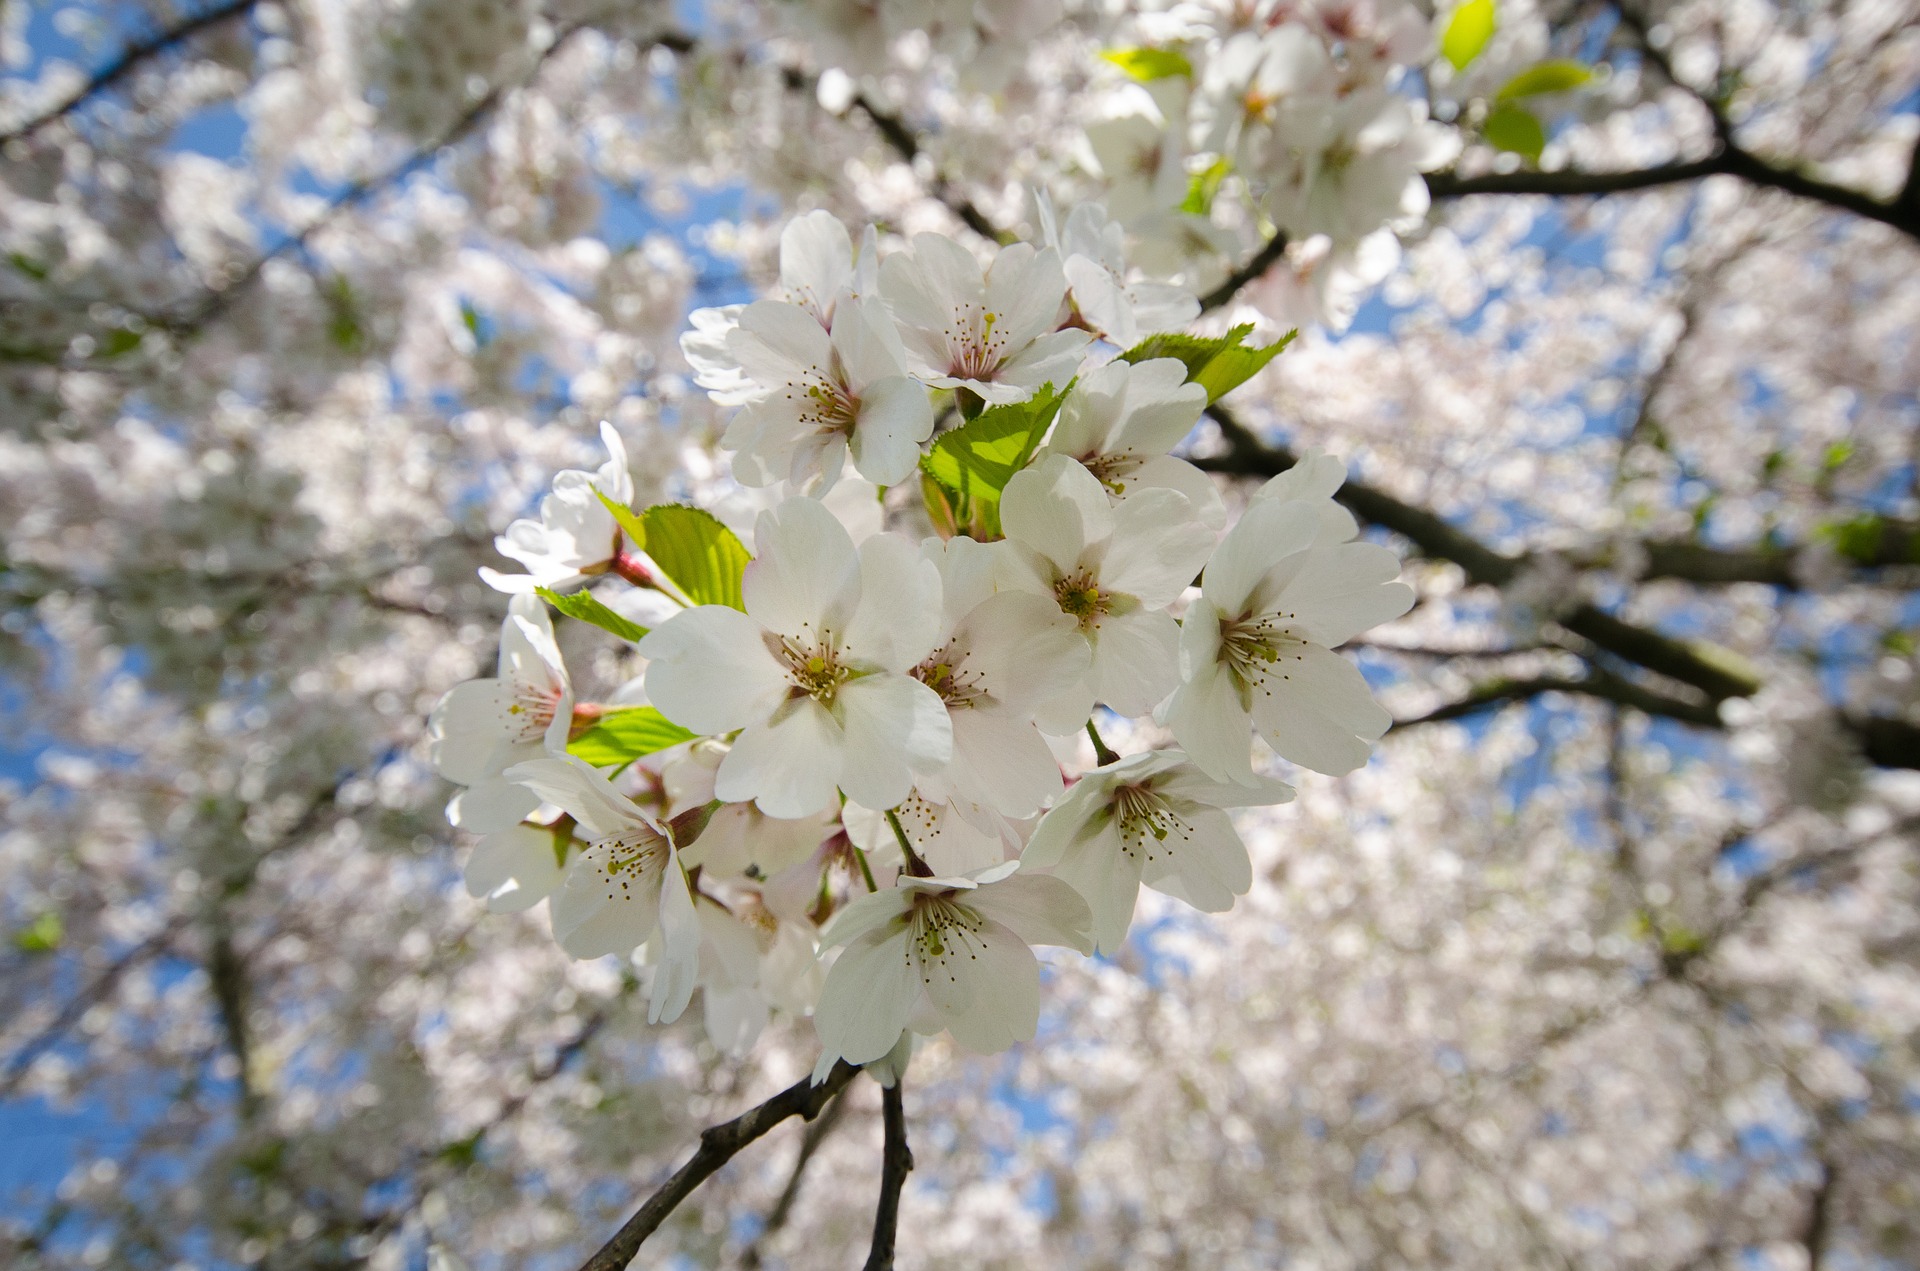 Blooming blossom